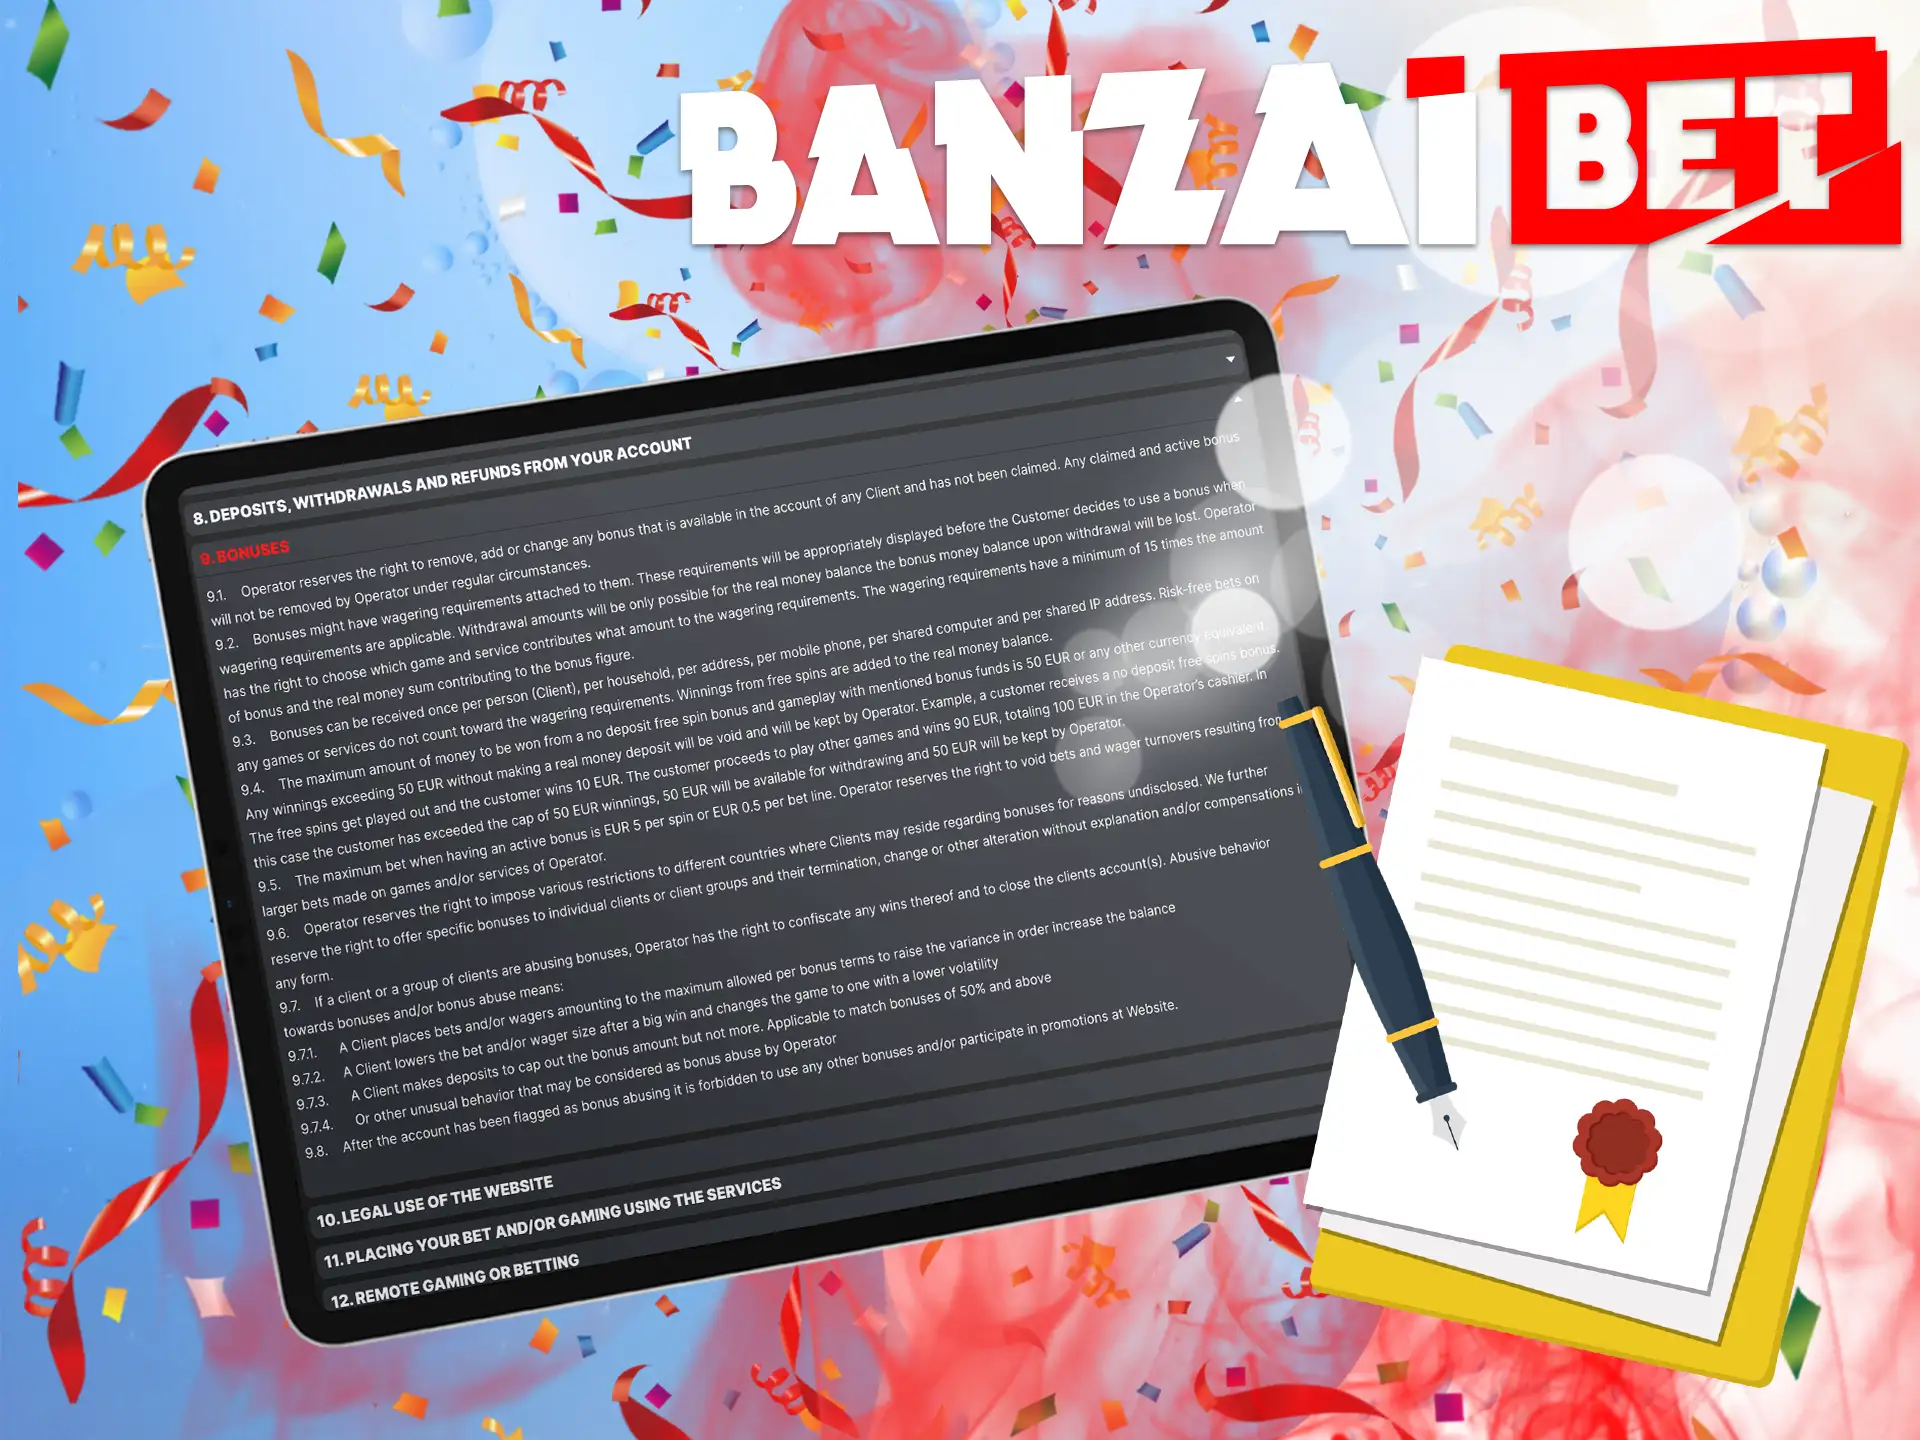 It is useful for every player to know what conditions apply to receive bonuses on the Banzai Bet platform.